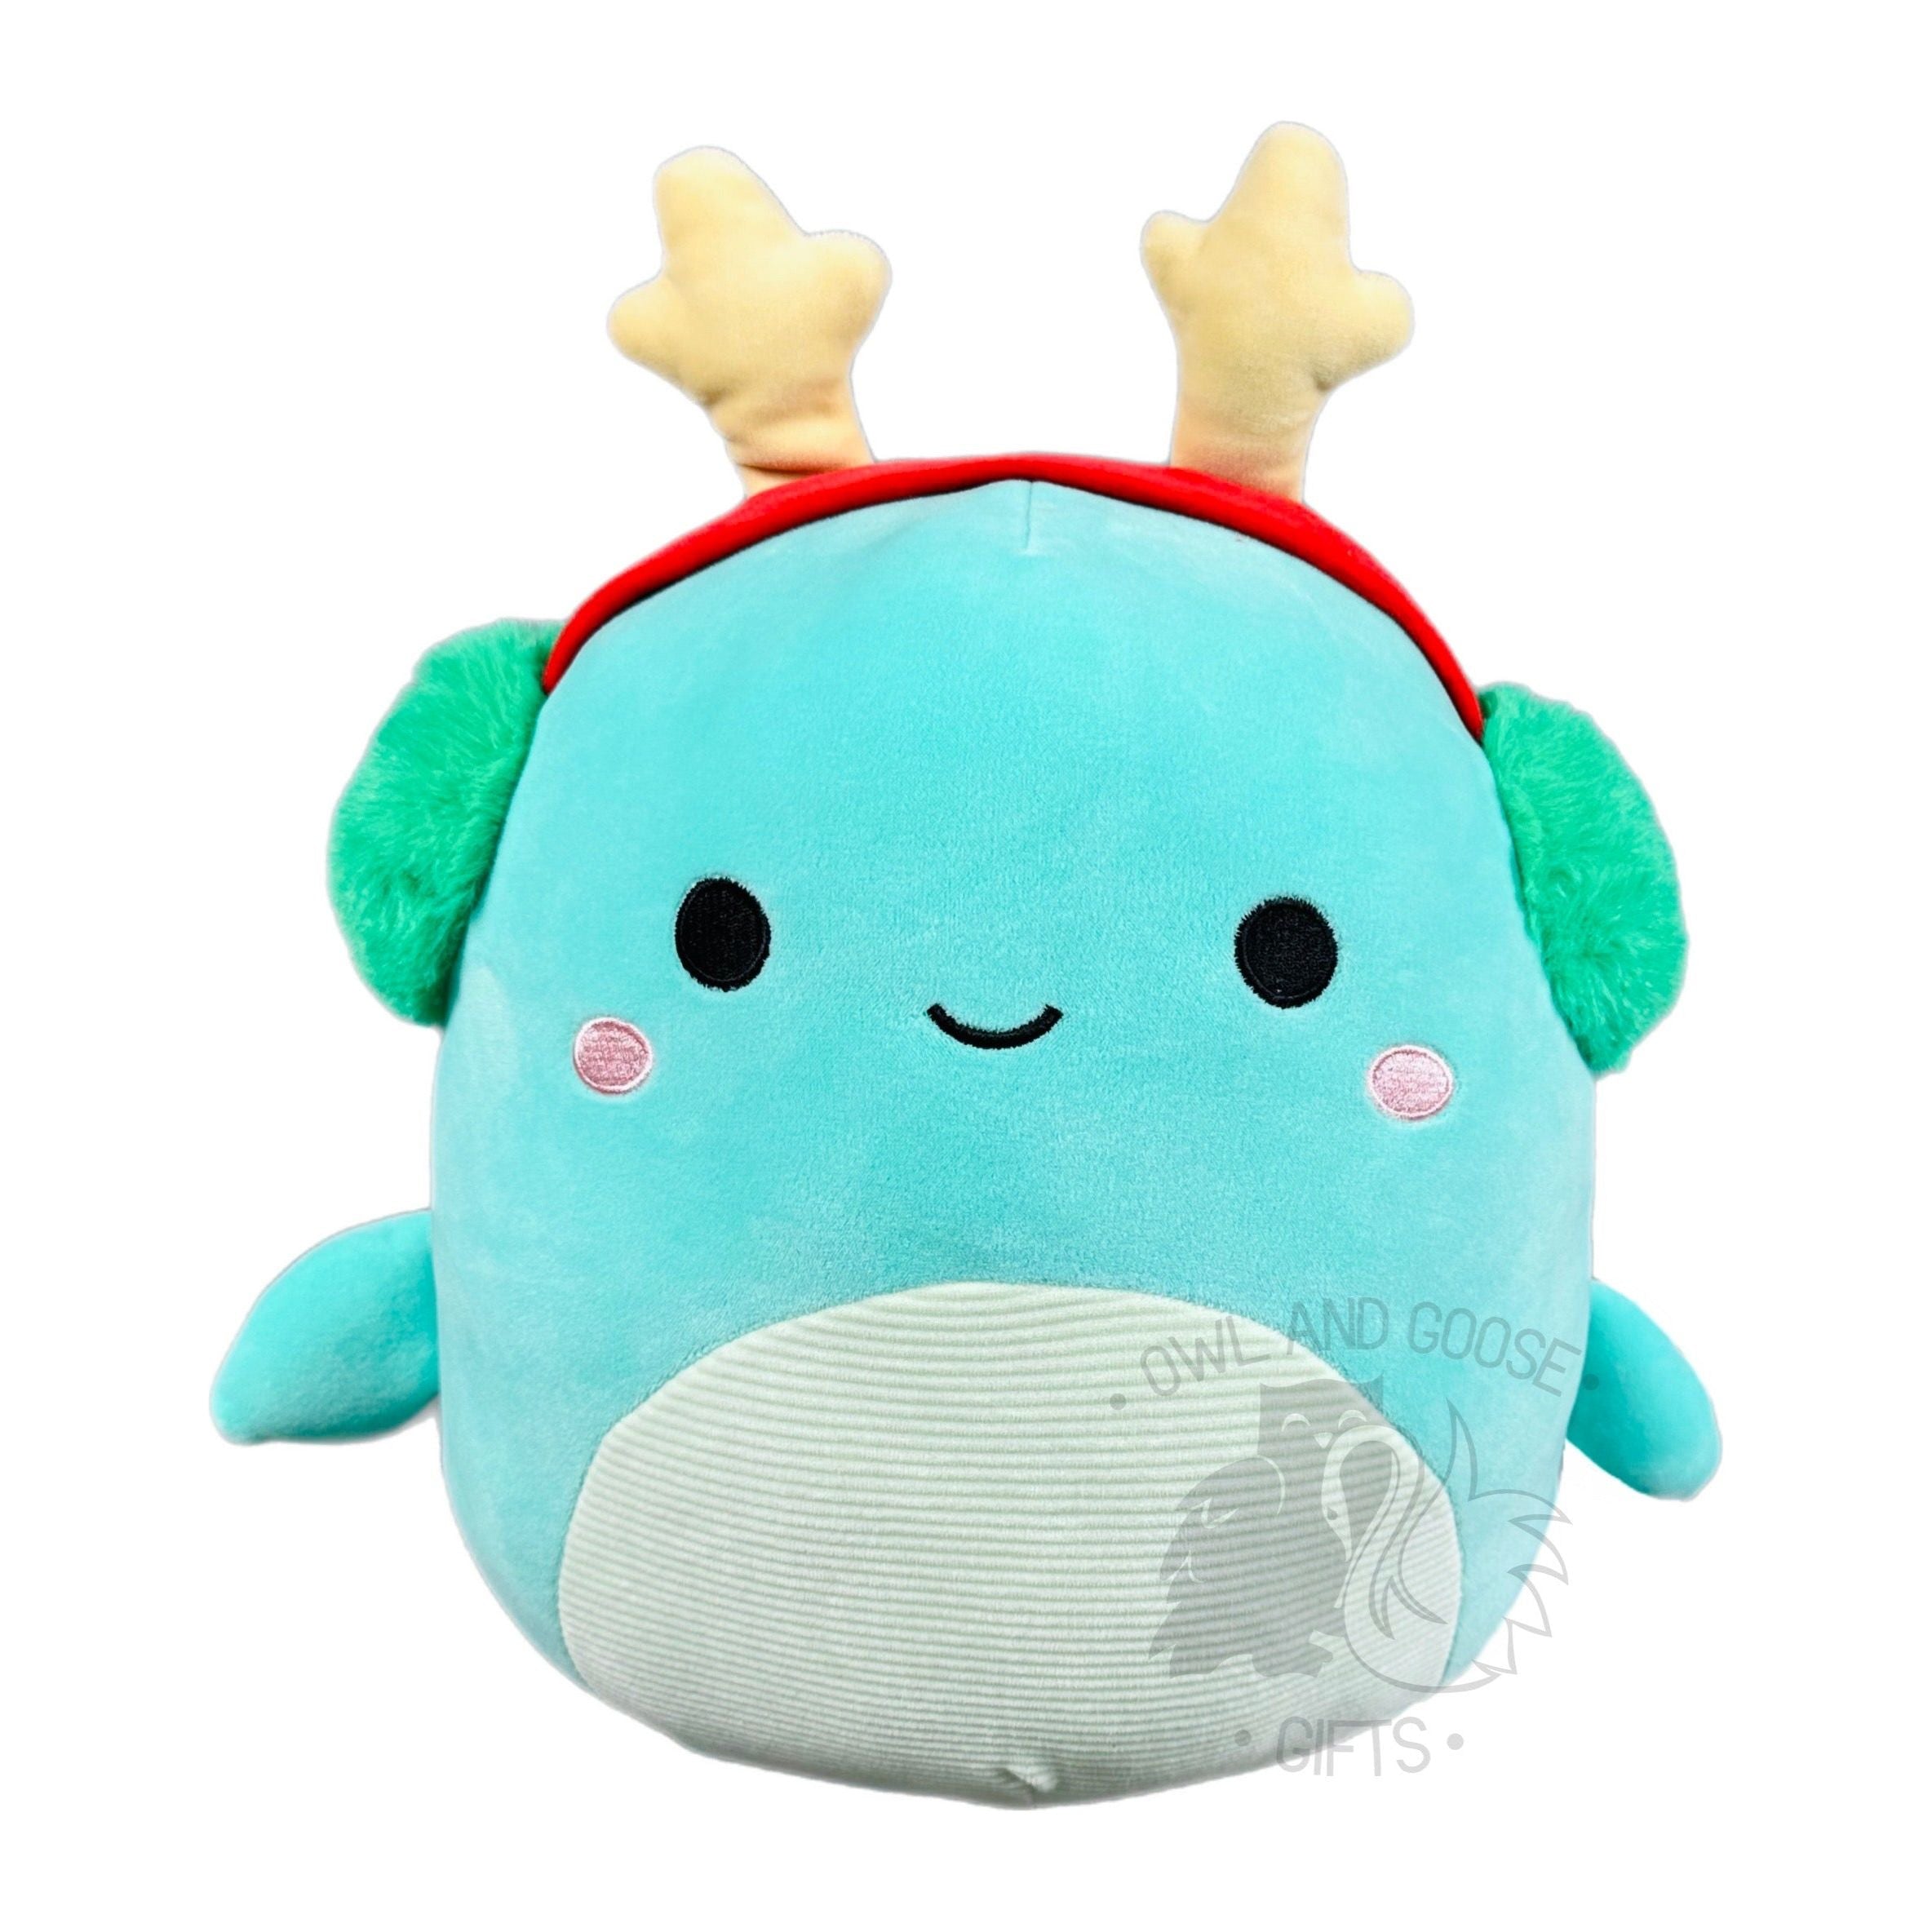 Squishmallows 12 Green Monster Halloween Plush Toy, 12 in